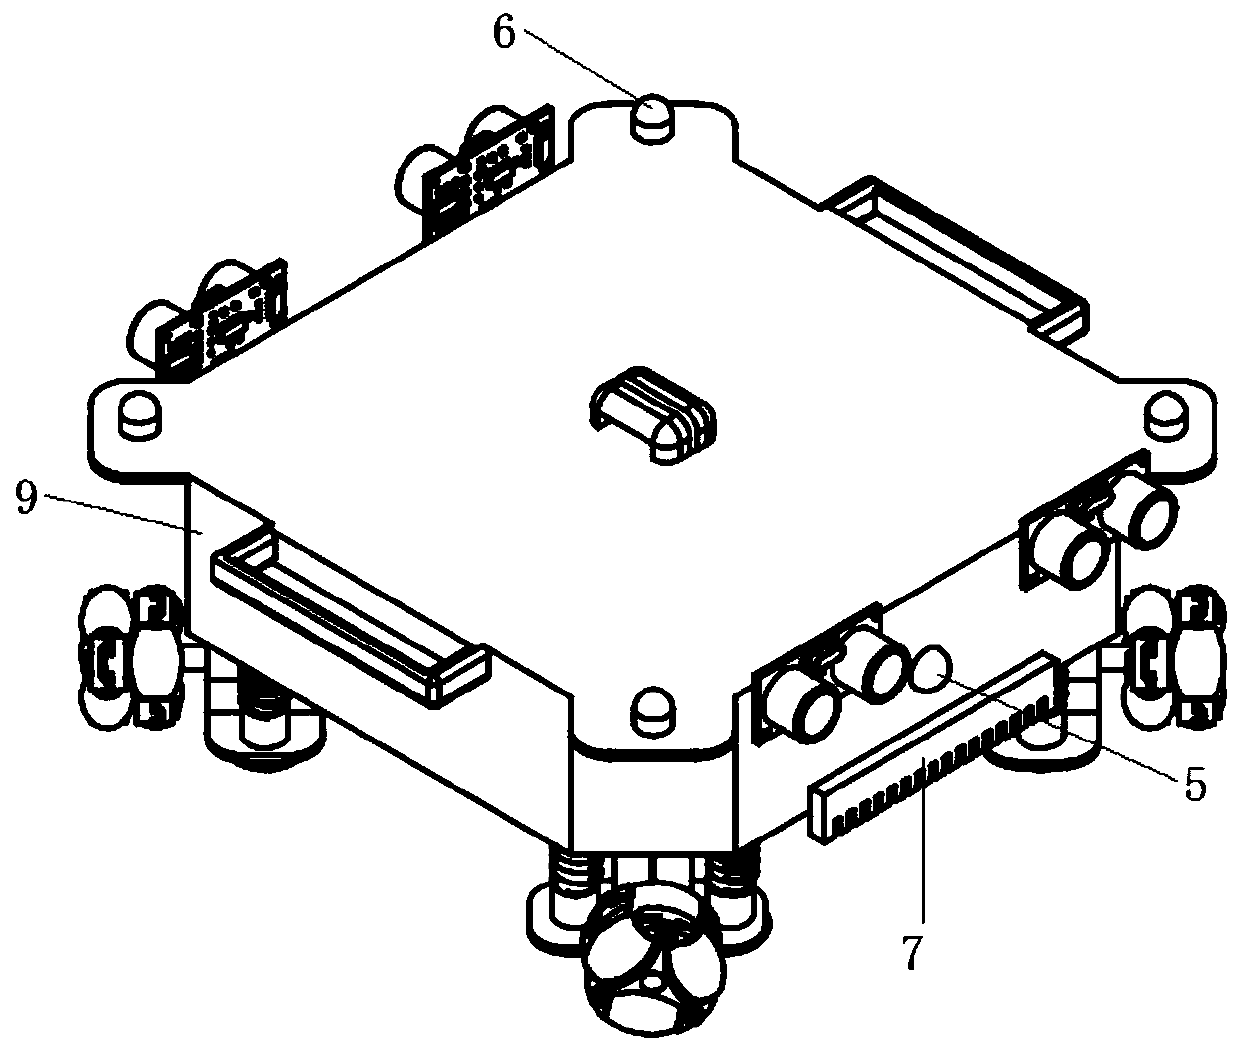 An intelligent omnidirectional AGV trolley and its control method